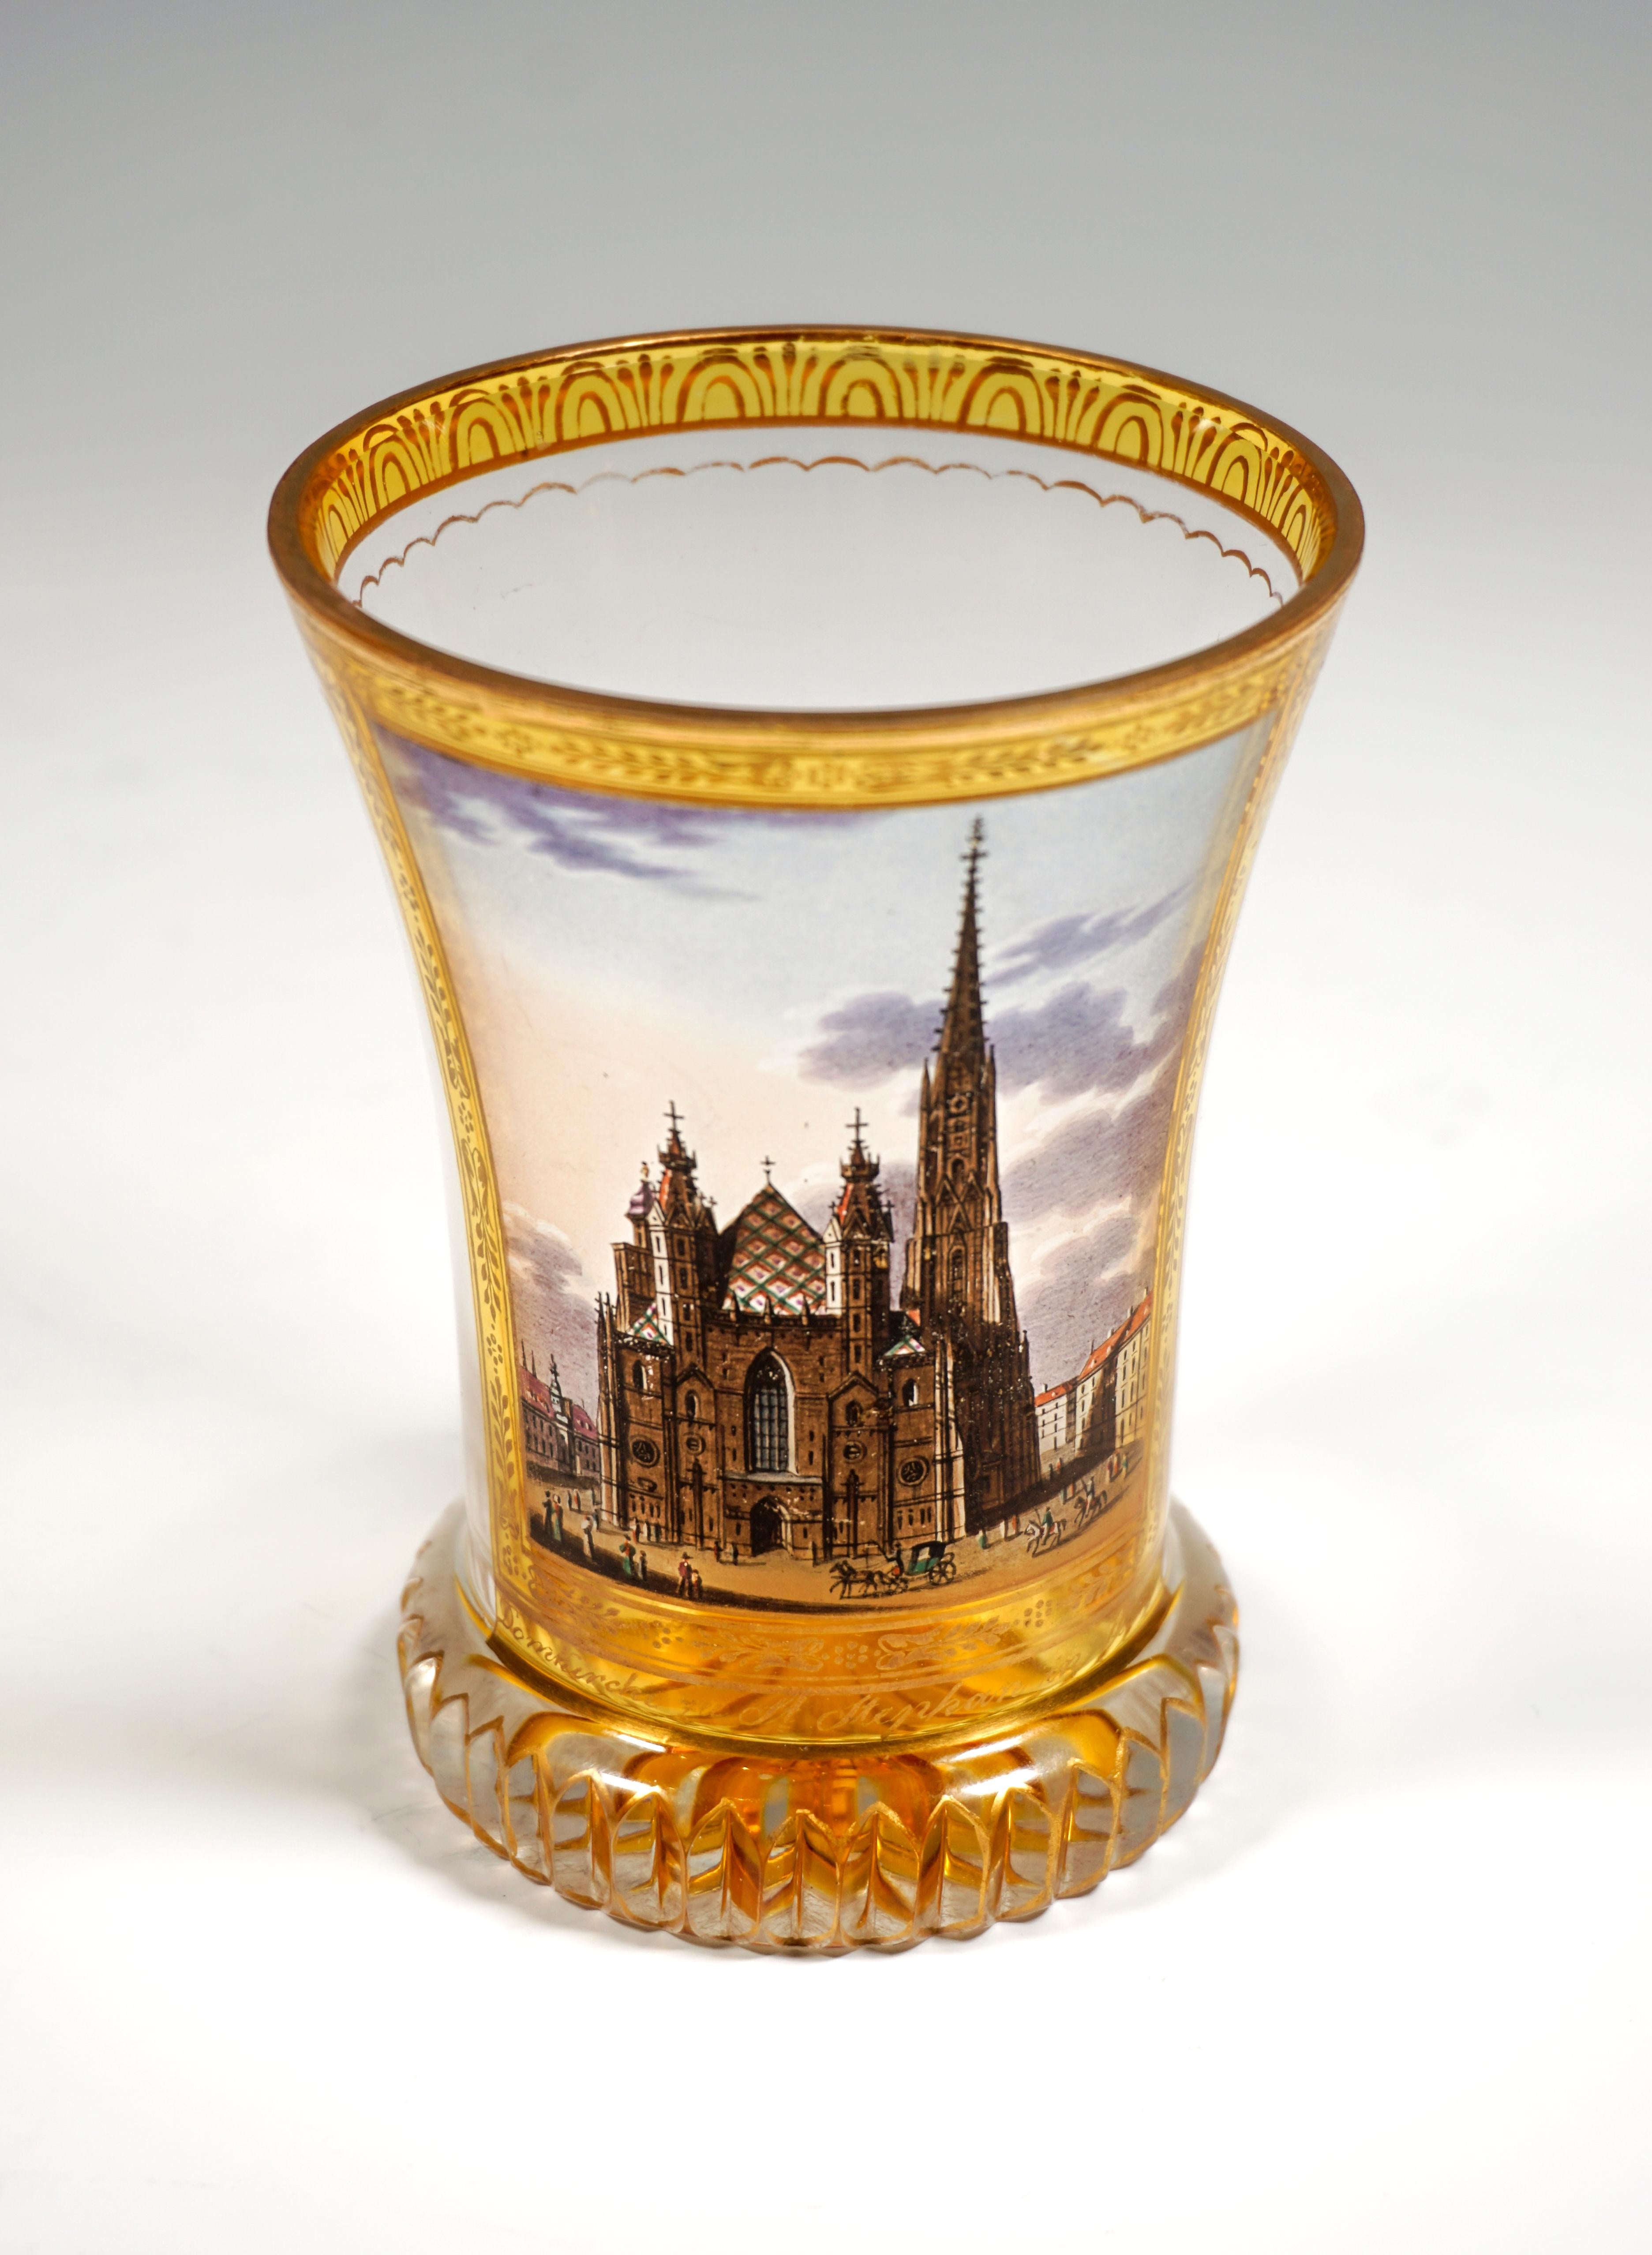 Colorless glass beaker with sweeping walls, large picture painting with an opaque, colorfully painted view of St. Stephen's Cathedral in Vienna with a silver-yellow stained frame with gold leaf border and inscription in gold 'Domkirche zu St.